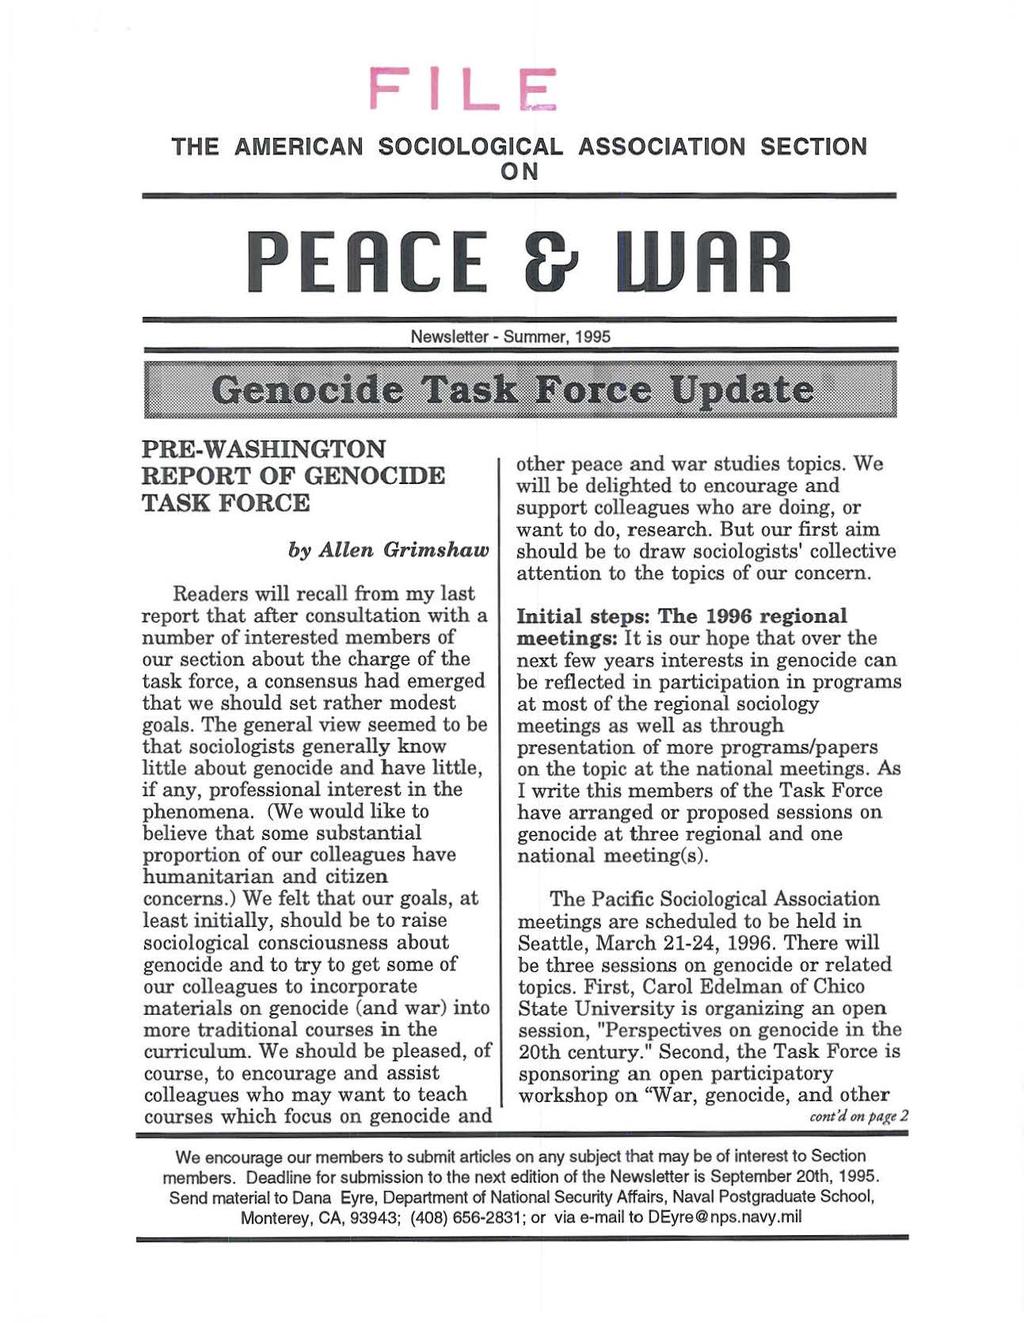 FILE THE AMERICAN SOCIOLOGICAL ASSOCIATION SECTION ON PERCE I} WHR PRE-WASHINGTON REPORT OF GENOCIDE TASKFORCE by Allen Grimshaw Readers will recall from my last report that after consultation with a